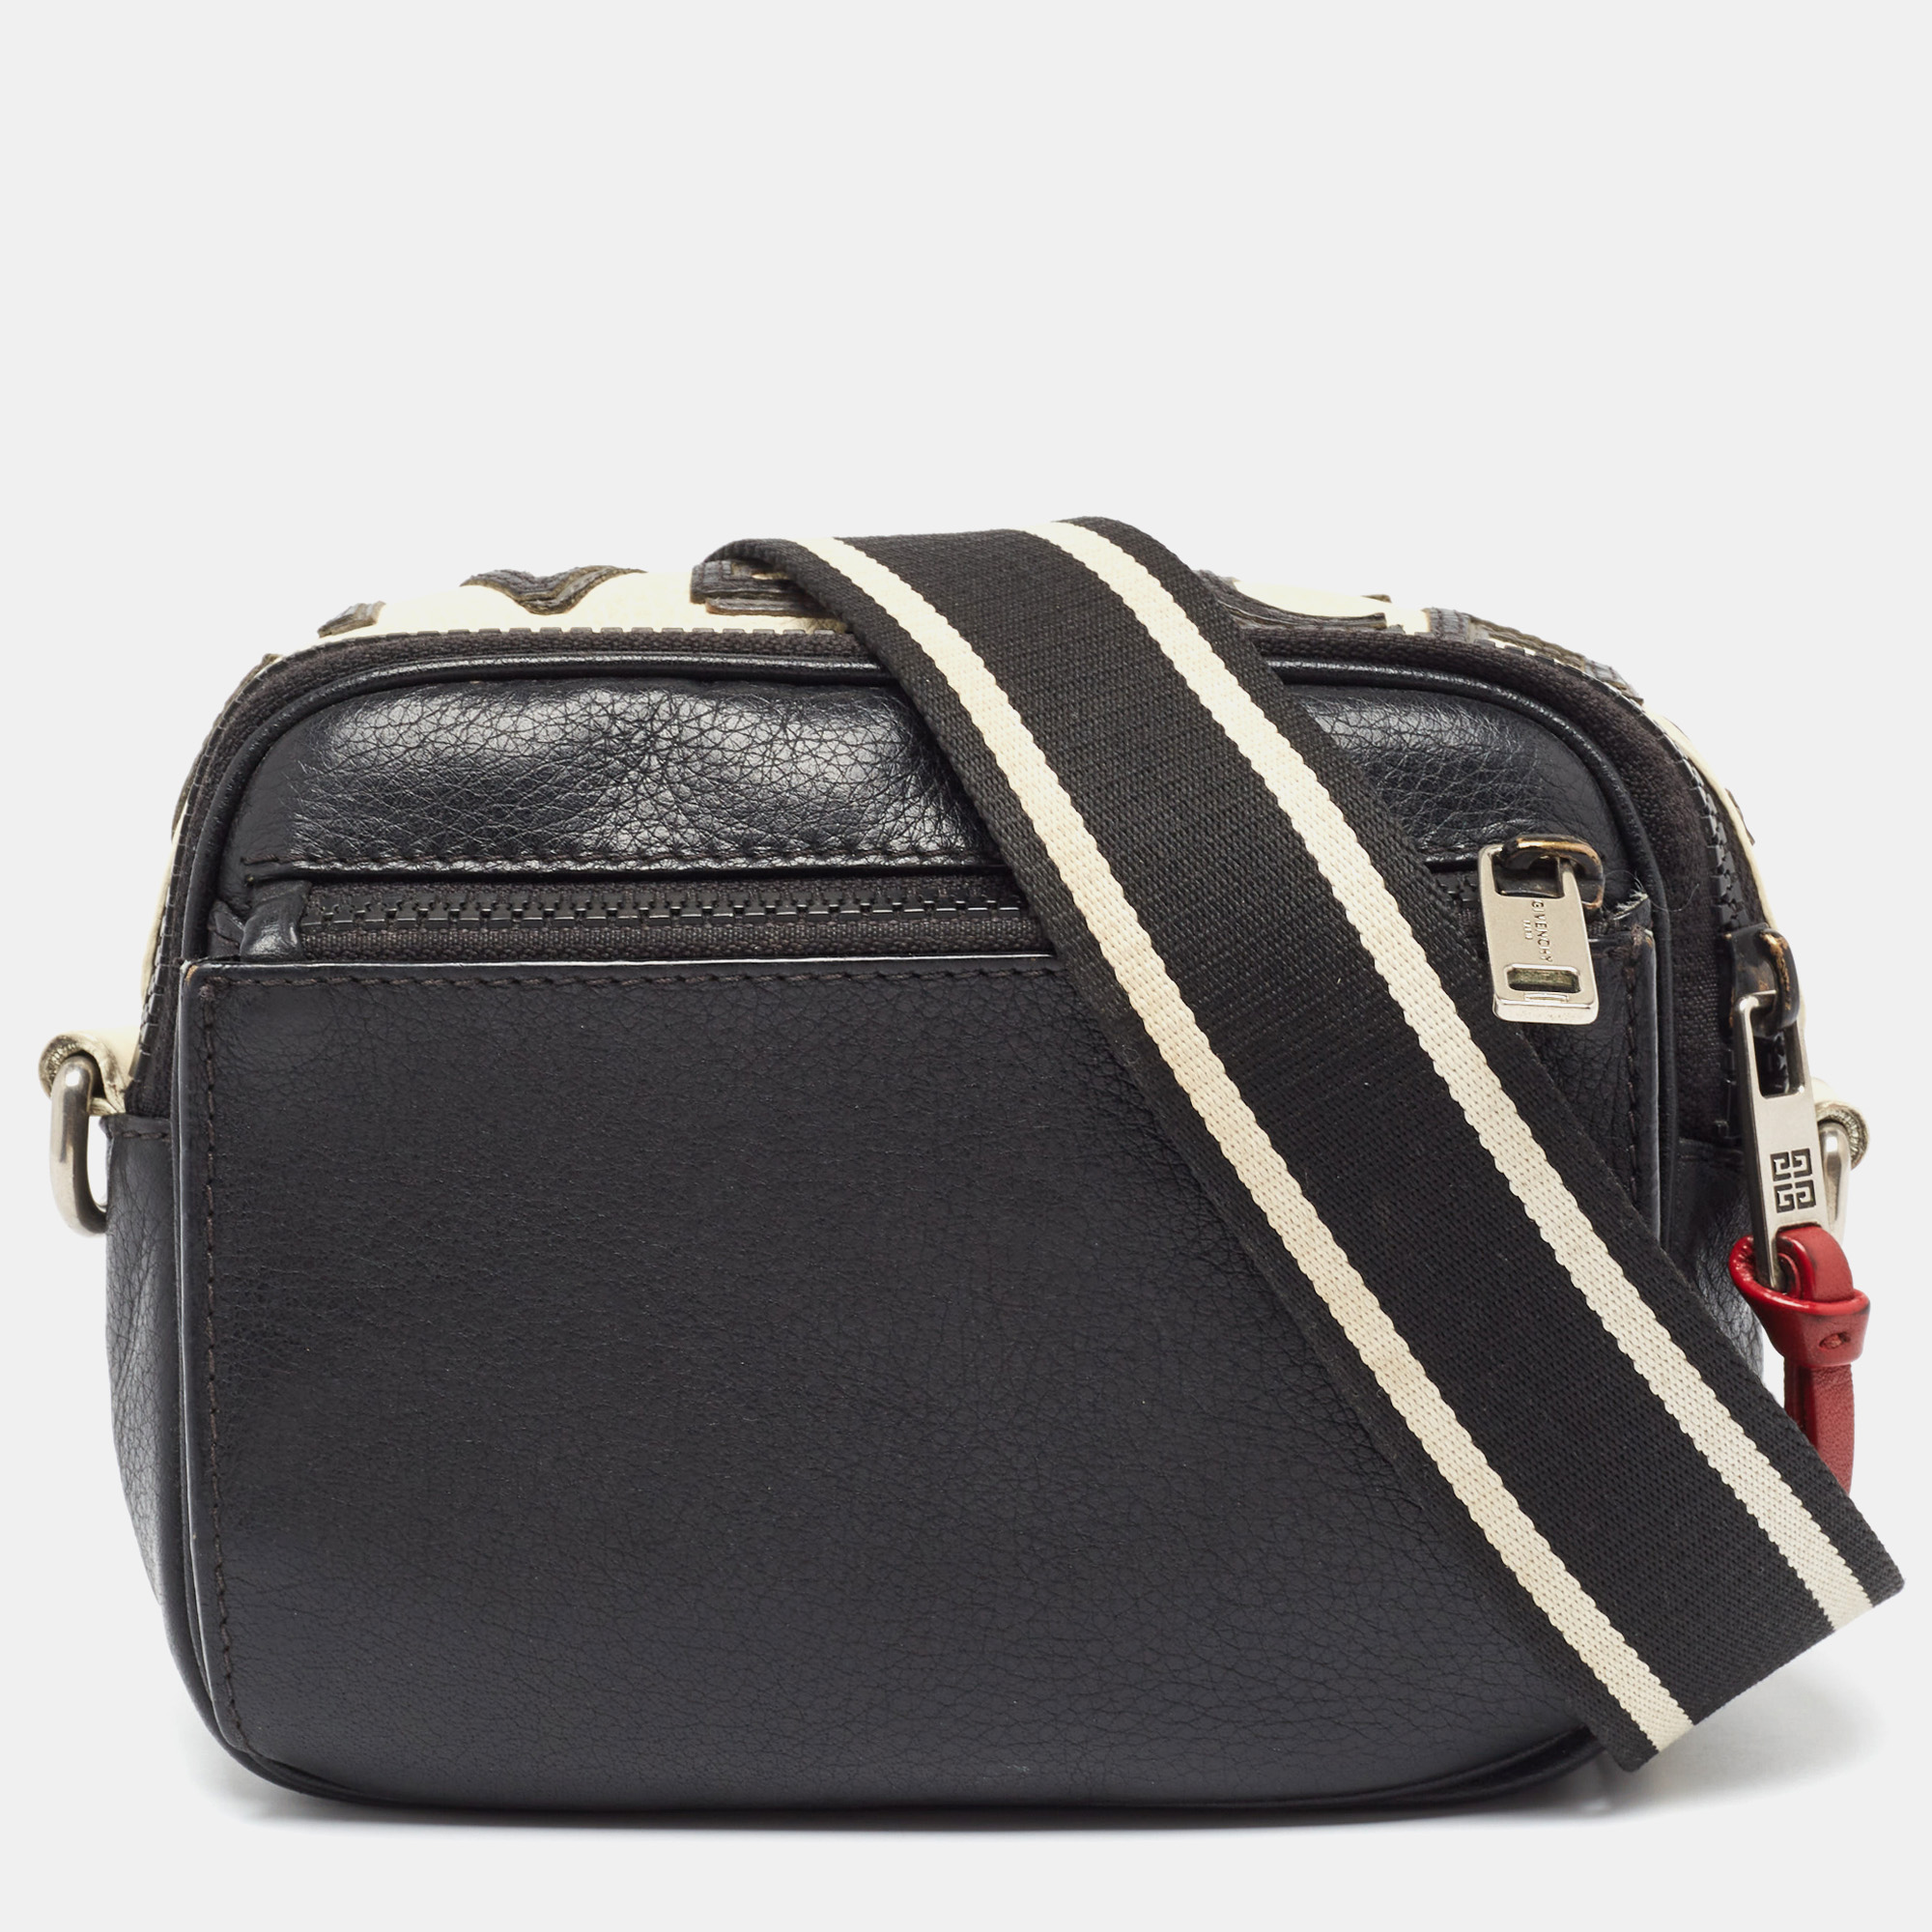 Trust this Givenchy bag for men to be light durable and comfortable to carry. It is crafted beautifully using the best materials to be a durable style ally.